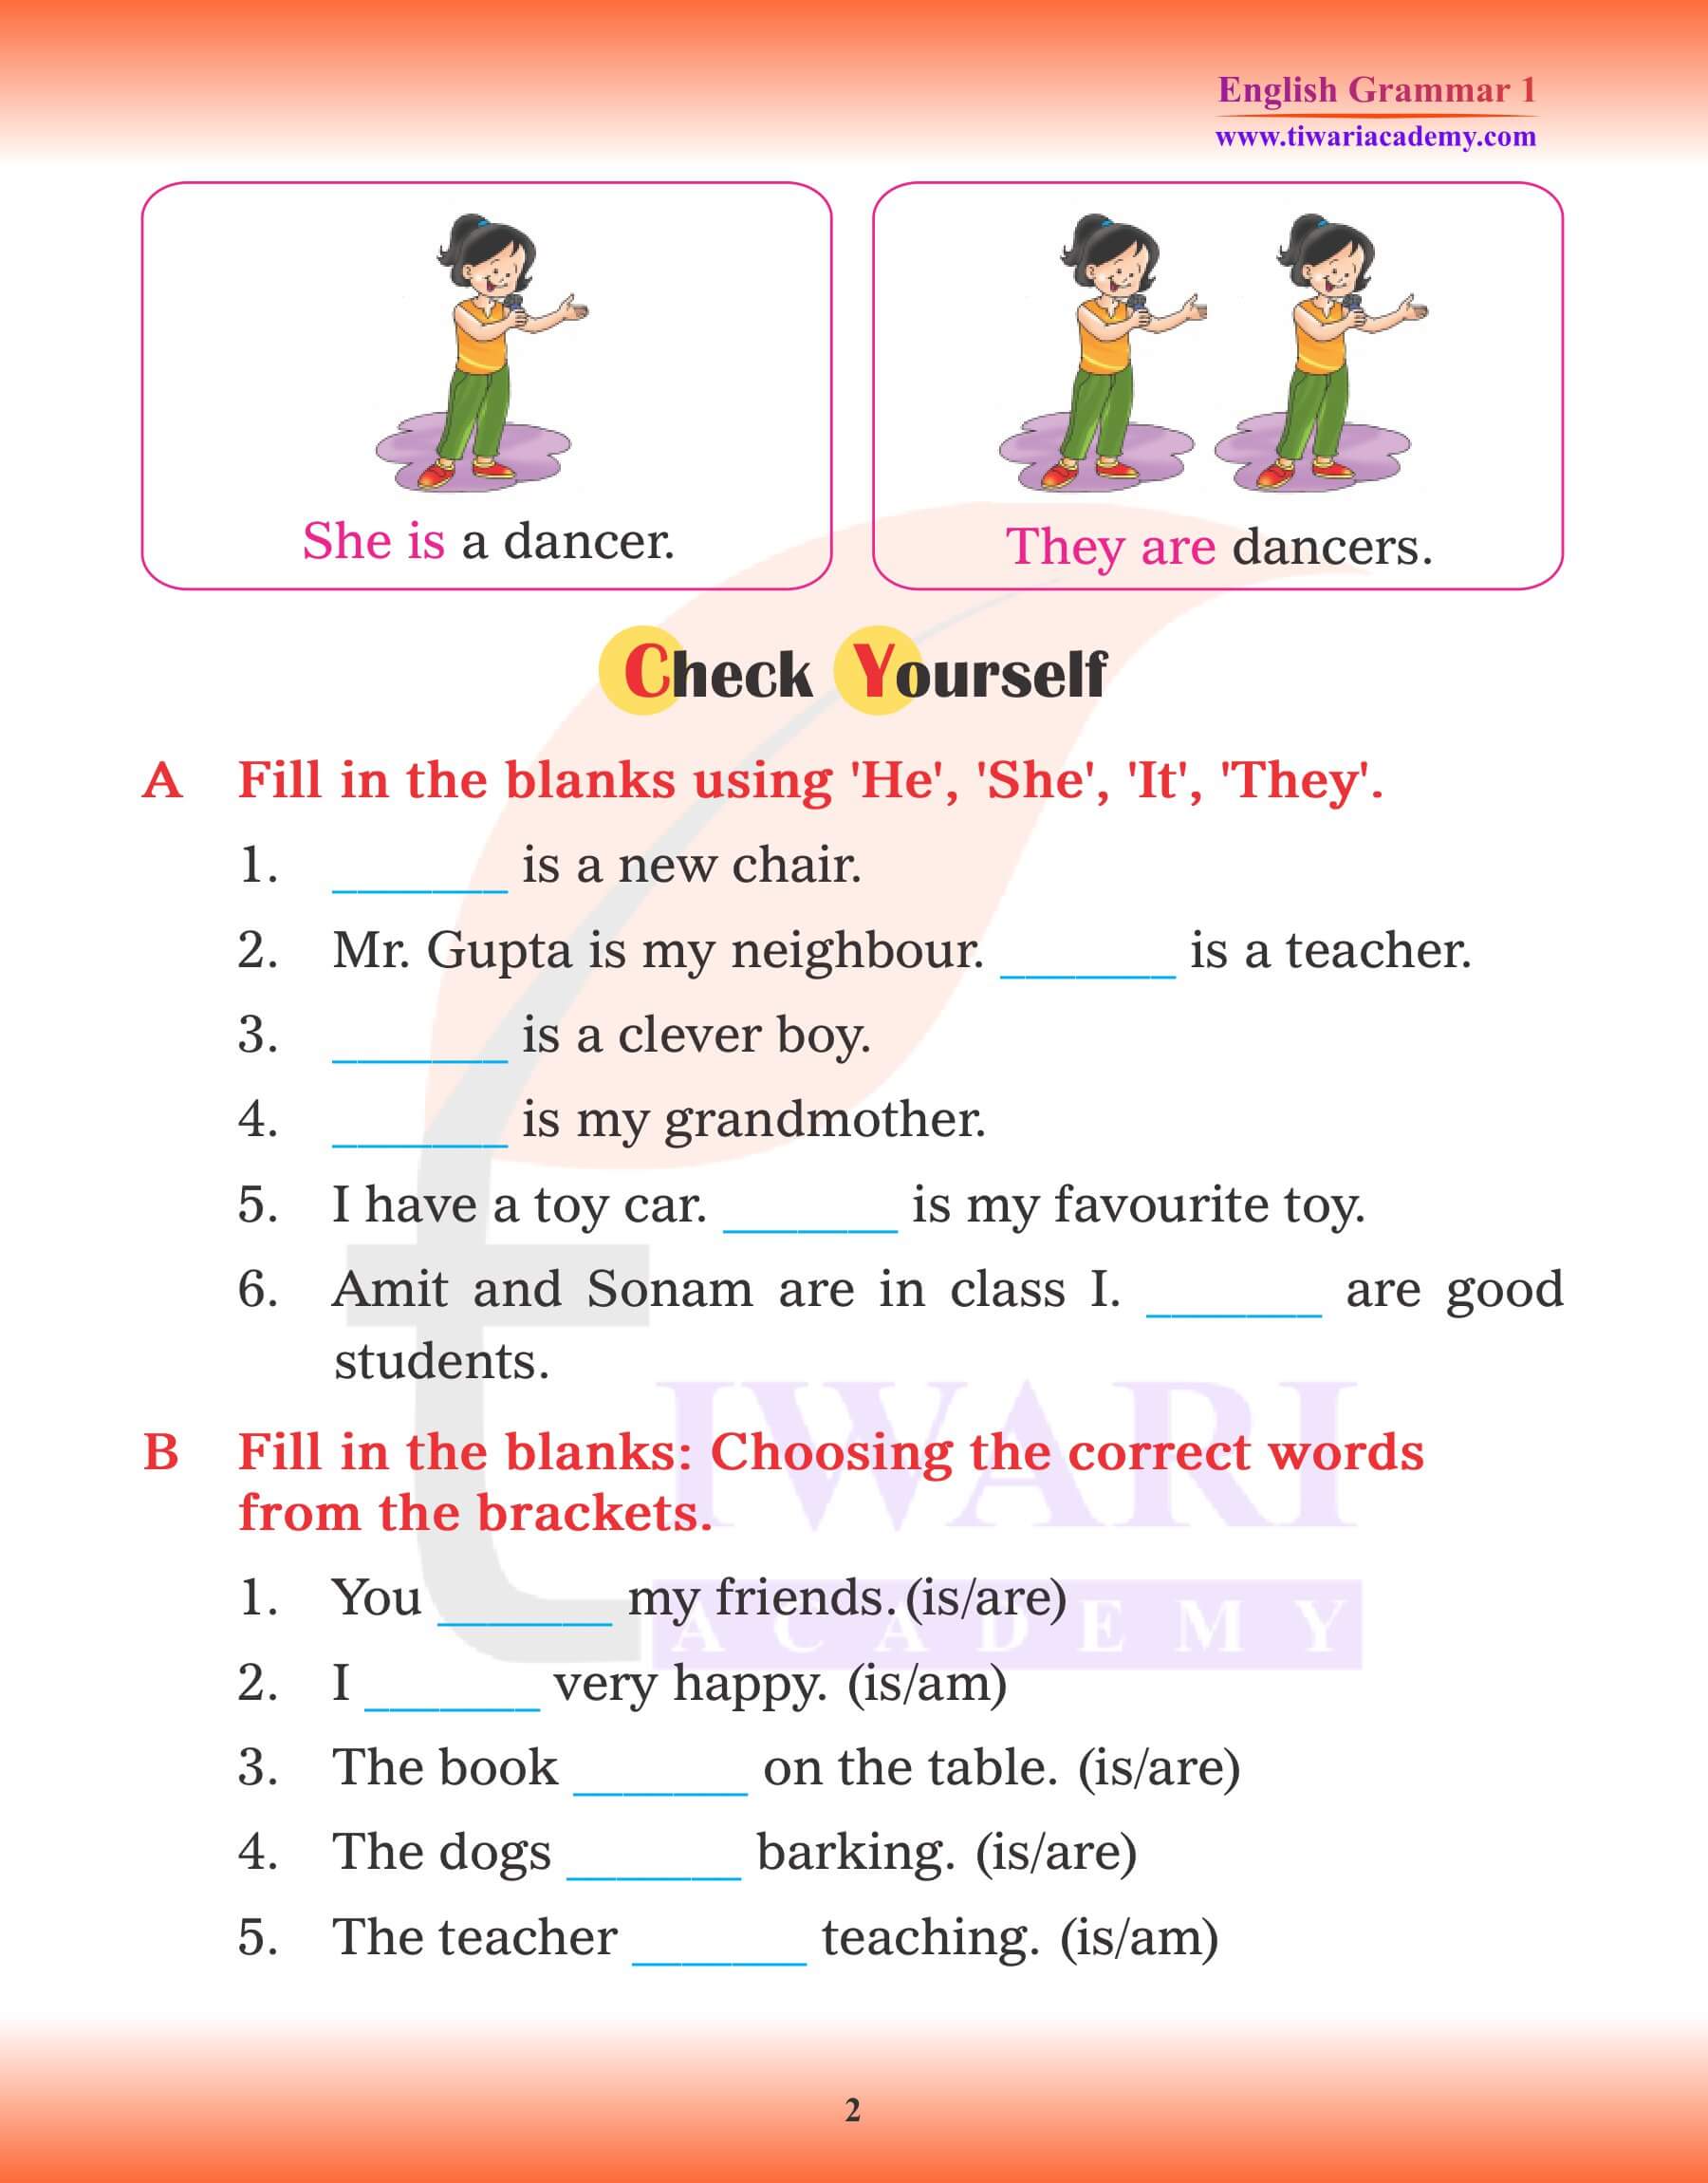 English Grammar Class 1 Has and Have, Learn and Practice